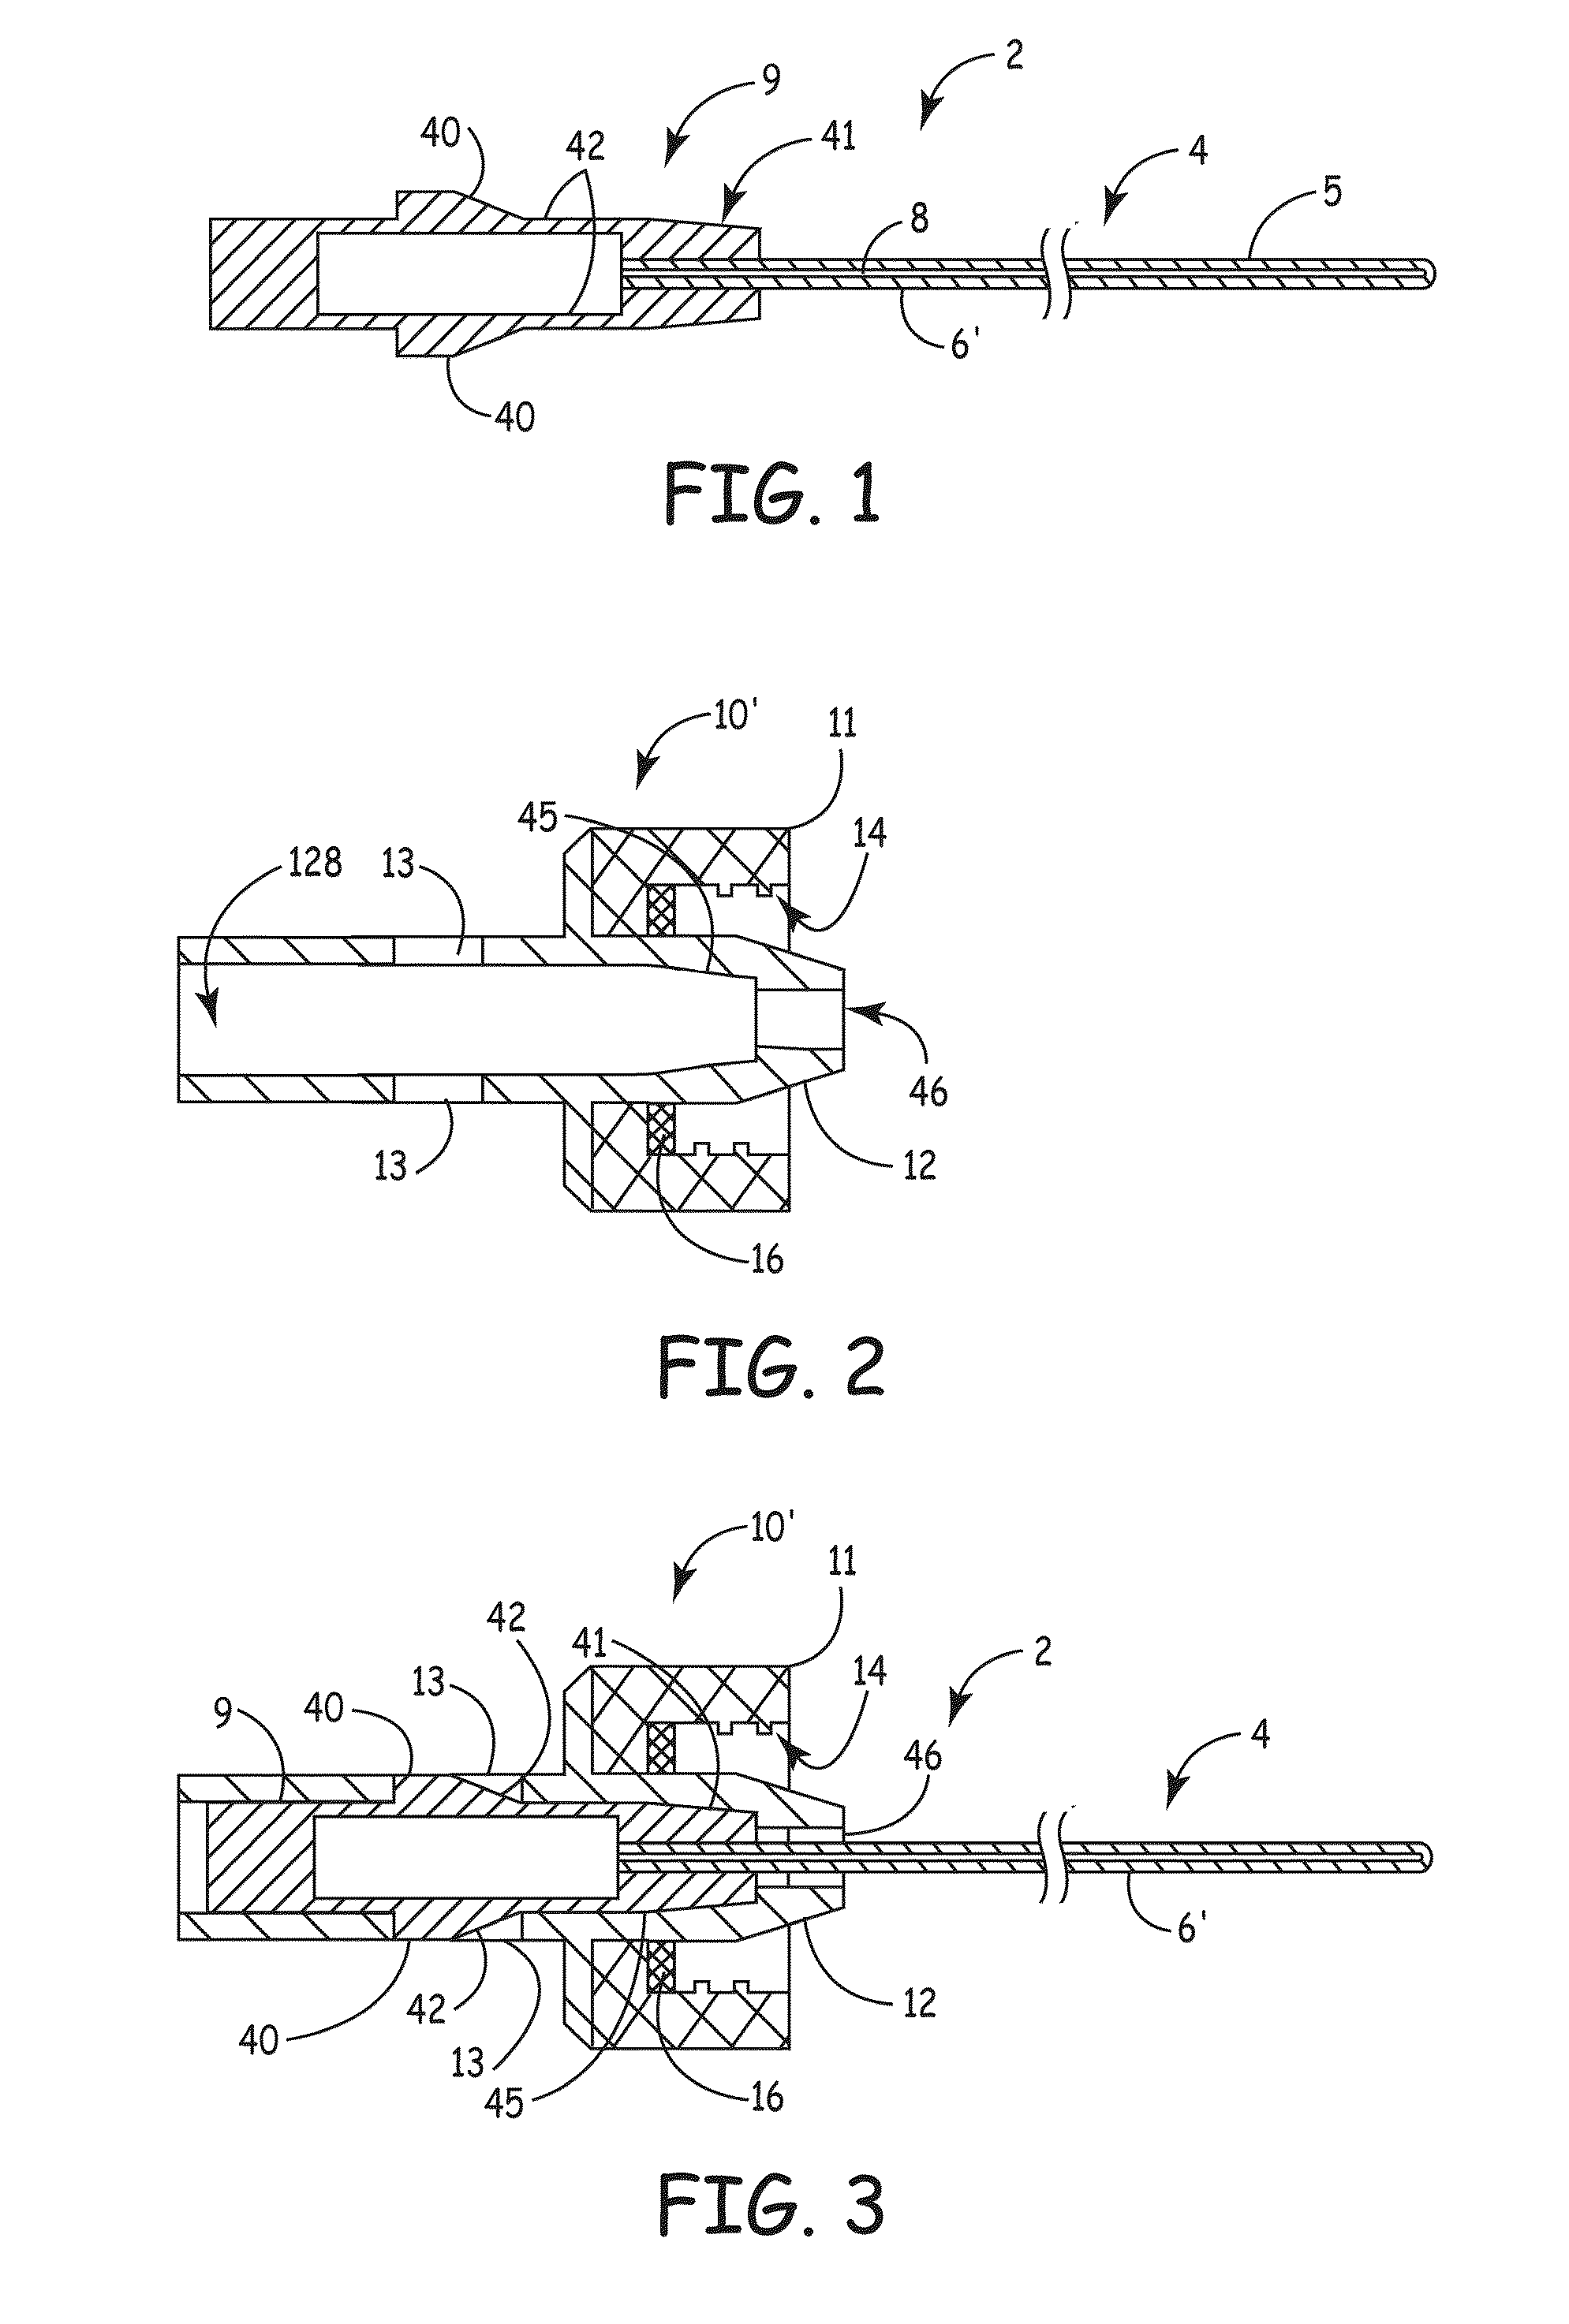 Apparatus for delivery of device and antimicrobial agent into trans-dermal catheter